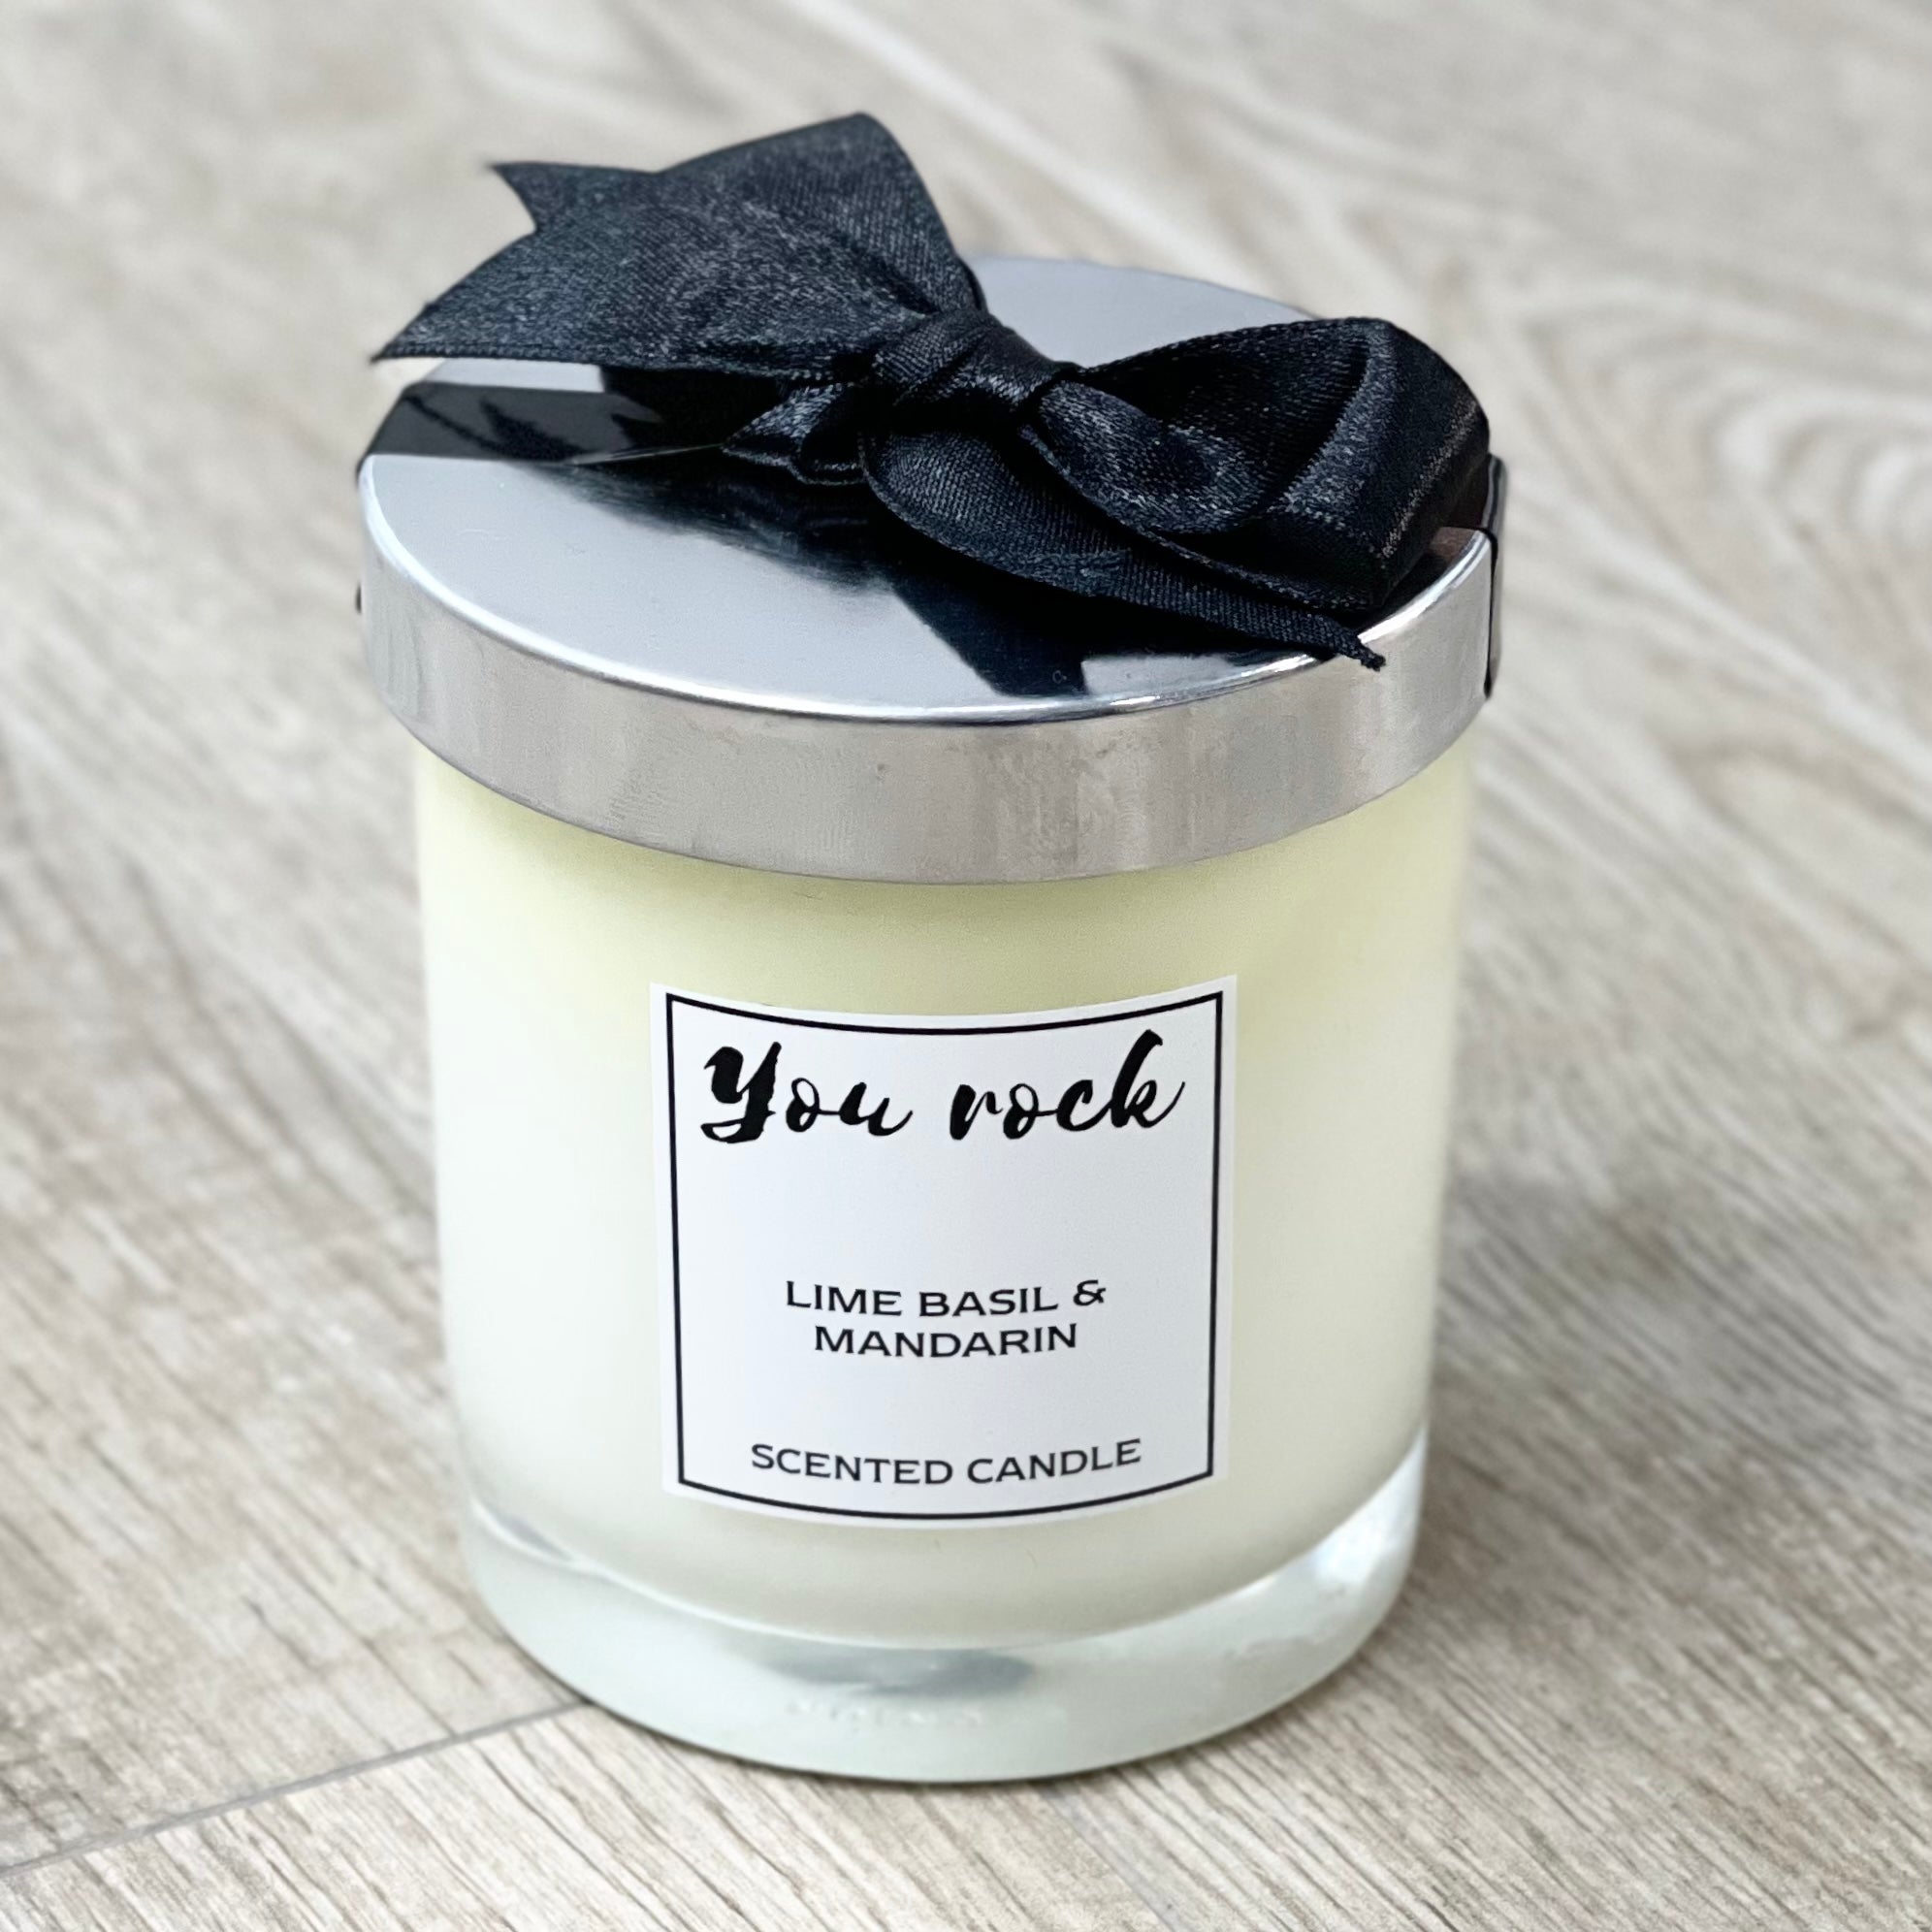 Natural Soy Wax Scented Candle - Lime Basil & Mandarin Fragrance 